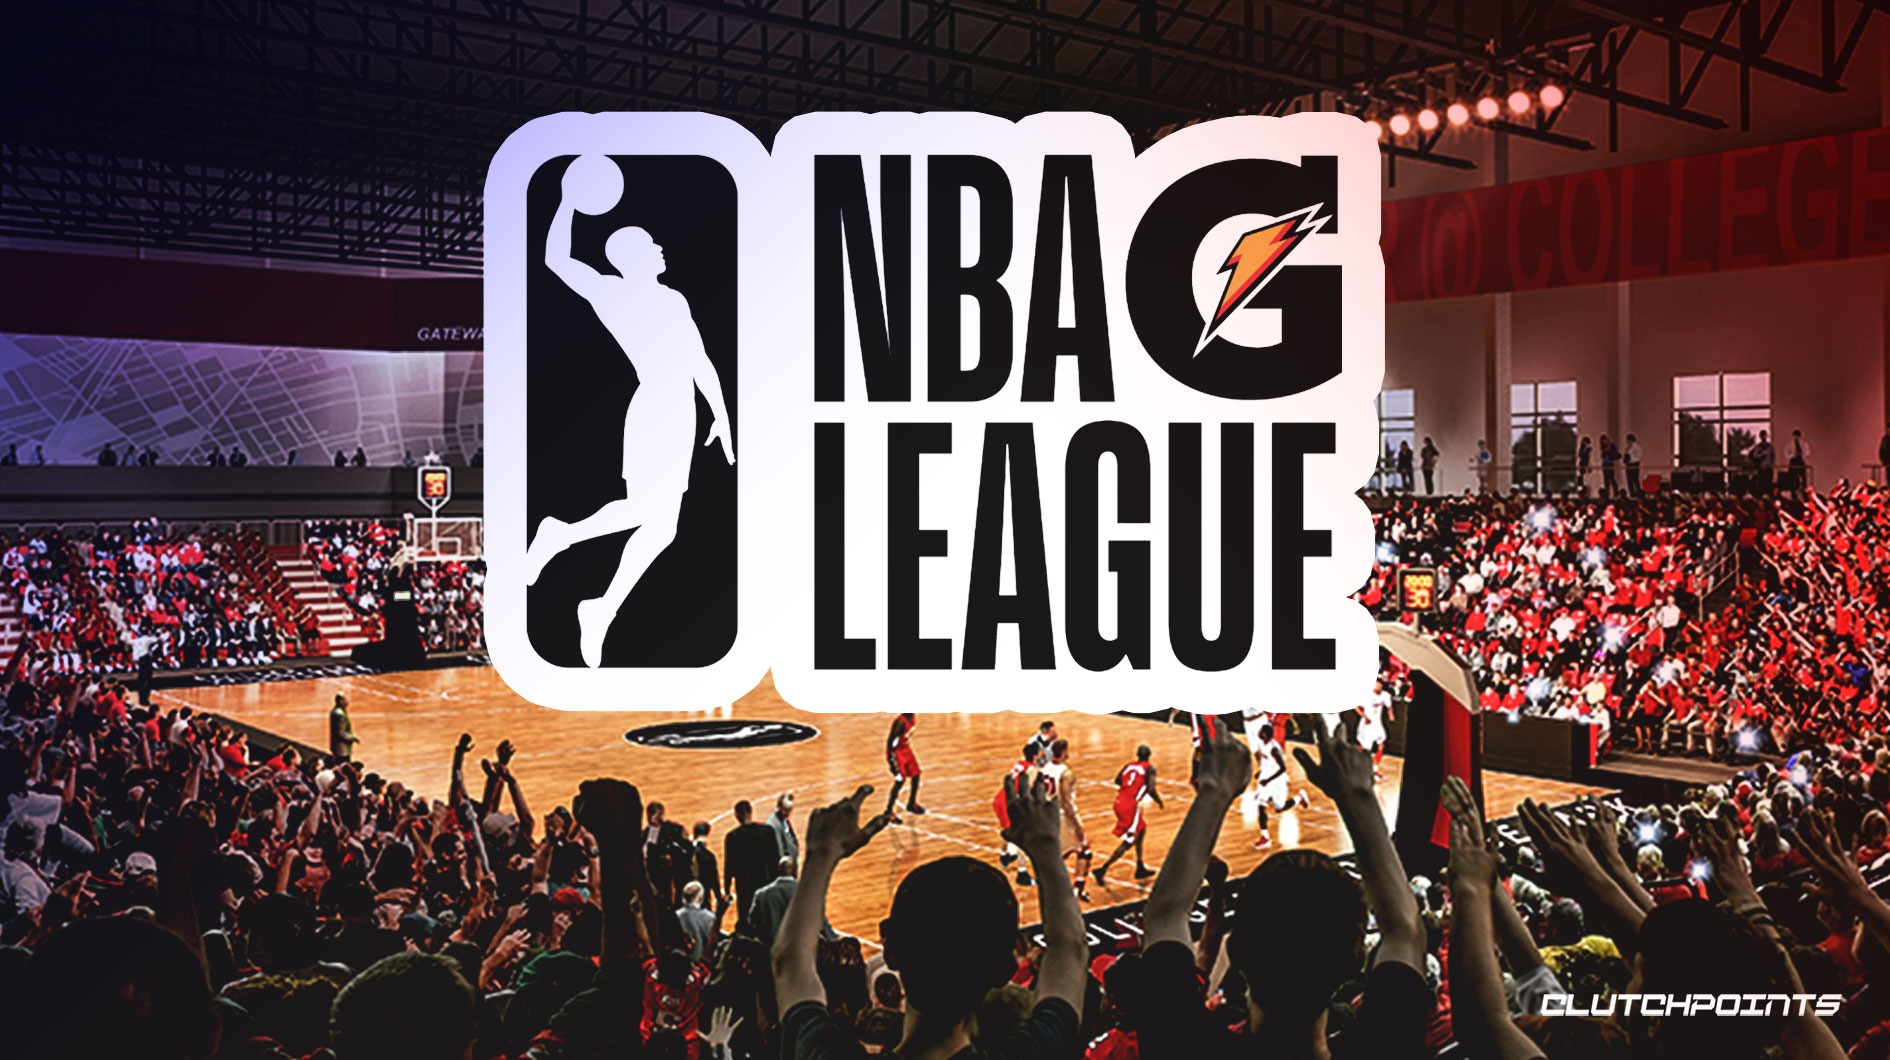 GLeague Players Unionize With Help From NBPA SPORTS AGENT BLOG